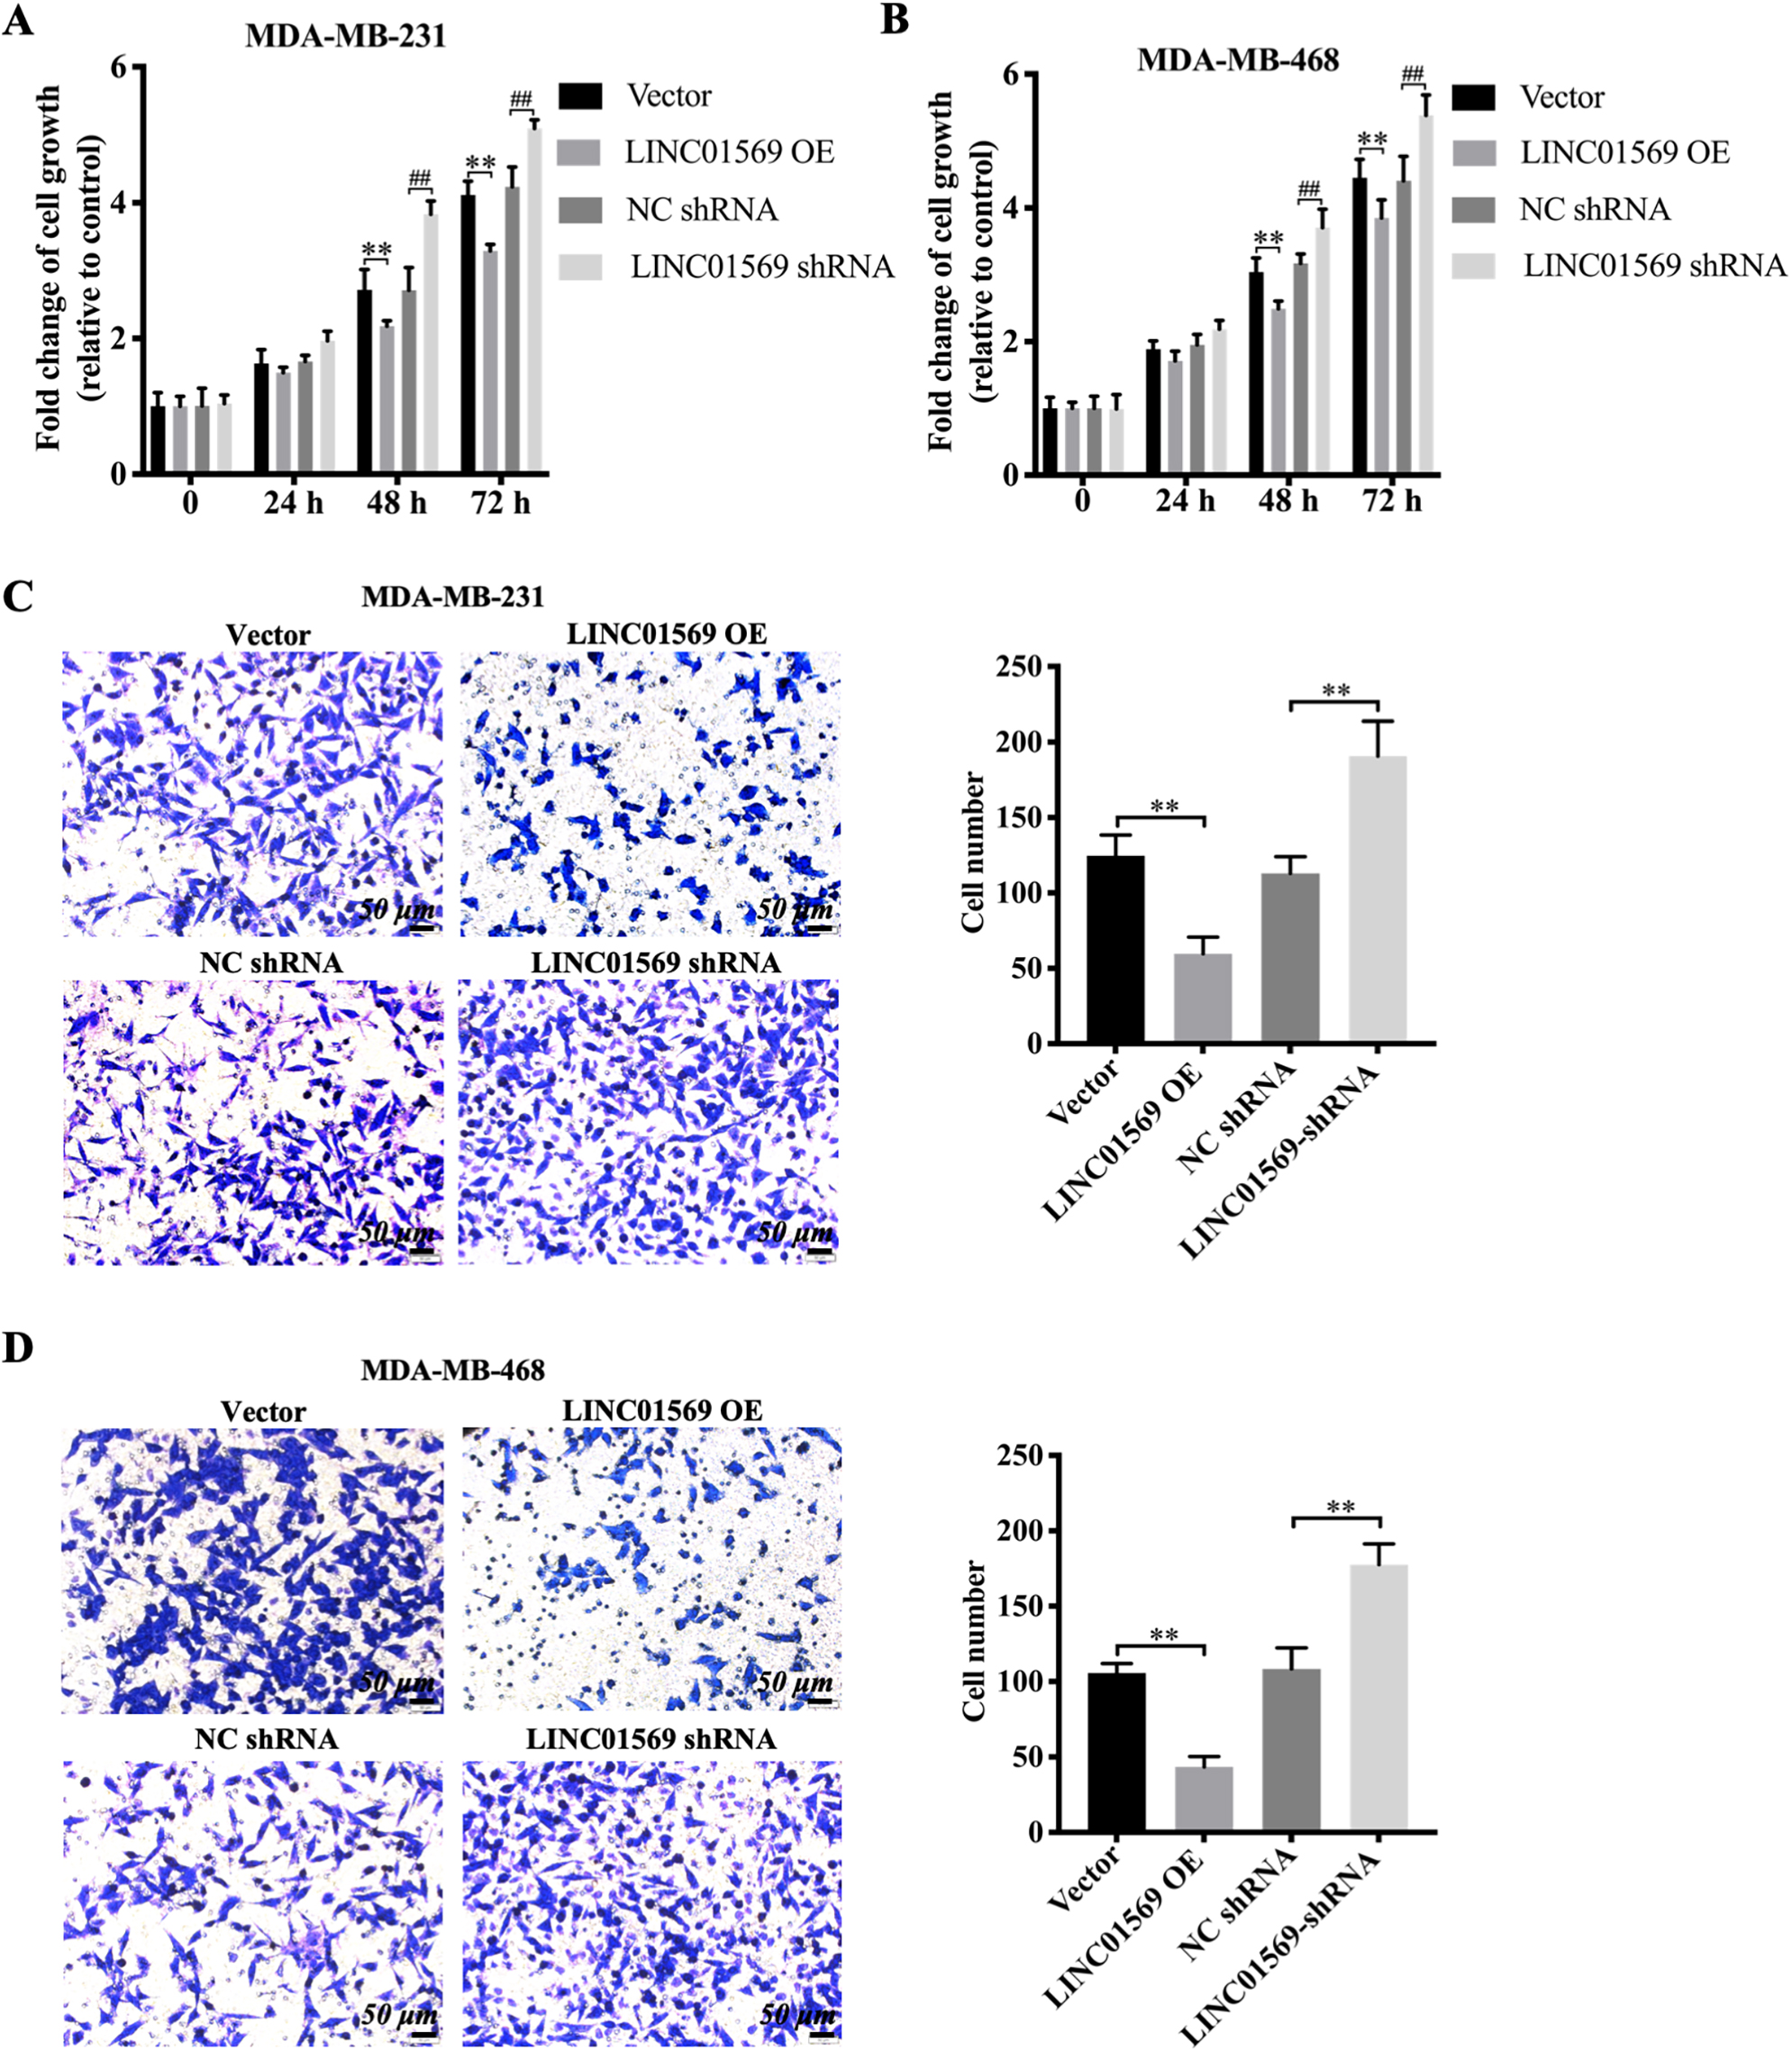 The Influence of LINC01569 on the viability and migration of TNBC cells. Transfection of MDA-MB-231 and MDA-MB-468 cells with overexpression plasmid (LINC01569 OE), siRNA targeting LINC01569 (LINC01569 siRNA), and the corresponding control vector/negative siRNA. (A–B) MDA-MB-231 (A) and MDA-MB-468 (B) cells were cultured for 0, 24, 48, and 72 h. Cell growth was measured using CCK-8. ** Indicated vector vs. LINC01569 OE. ## Indicated NC siRNA vs. LINC01569 siRNA. (C–D) Migration capability of MDA-MB-231 (C) and MDA-MB-468 cells (D) were transferred using transwell assay. Relative quantitation of migration cells, as illustrated in the right panel. ** Indicated LINC01569-overexpressed or LINC01569 siRNA vs. vector or NC siRNA. NC, negative control. Scale bar: 50 μm.